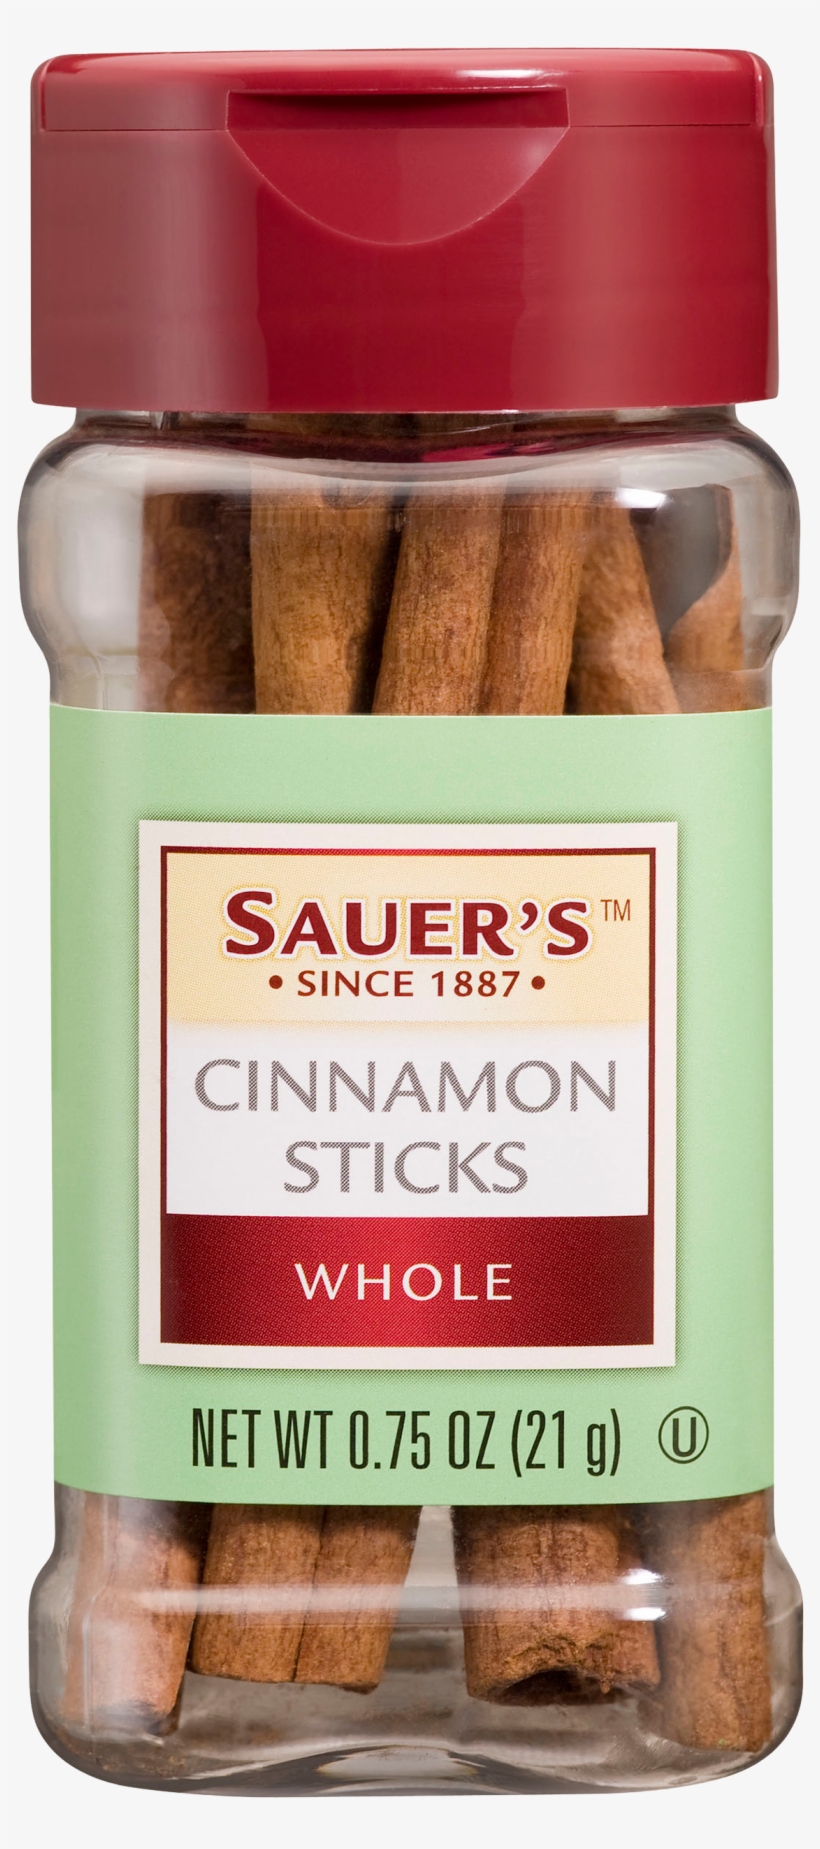 Cinnamon Sticks, Whole - Sauers Grillers Barbecue Seasoning - 3 Oz, transparent png #4055810